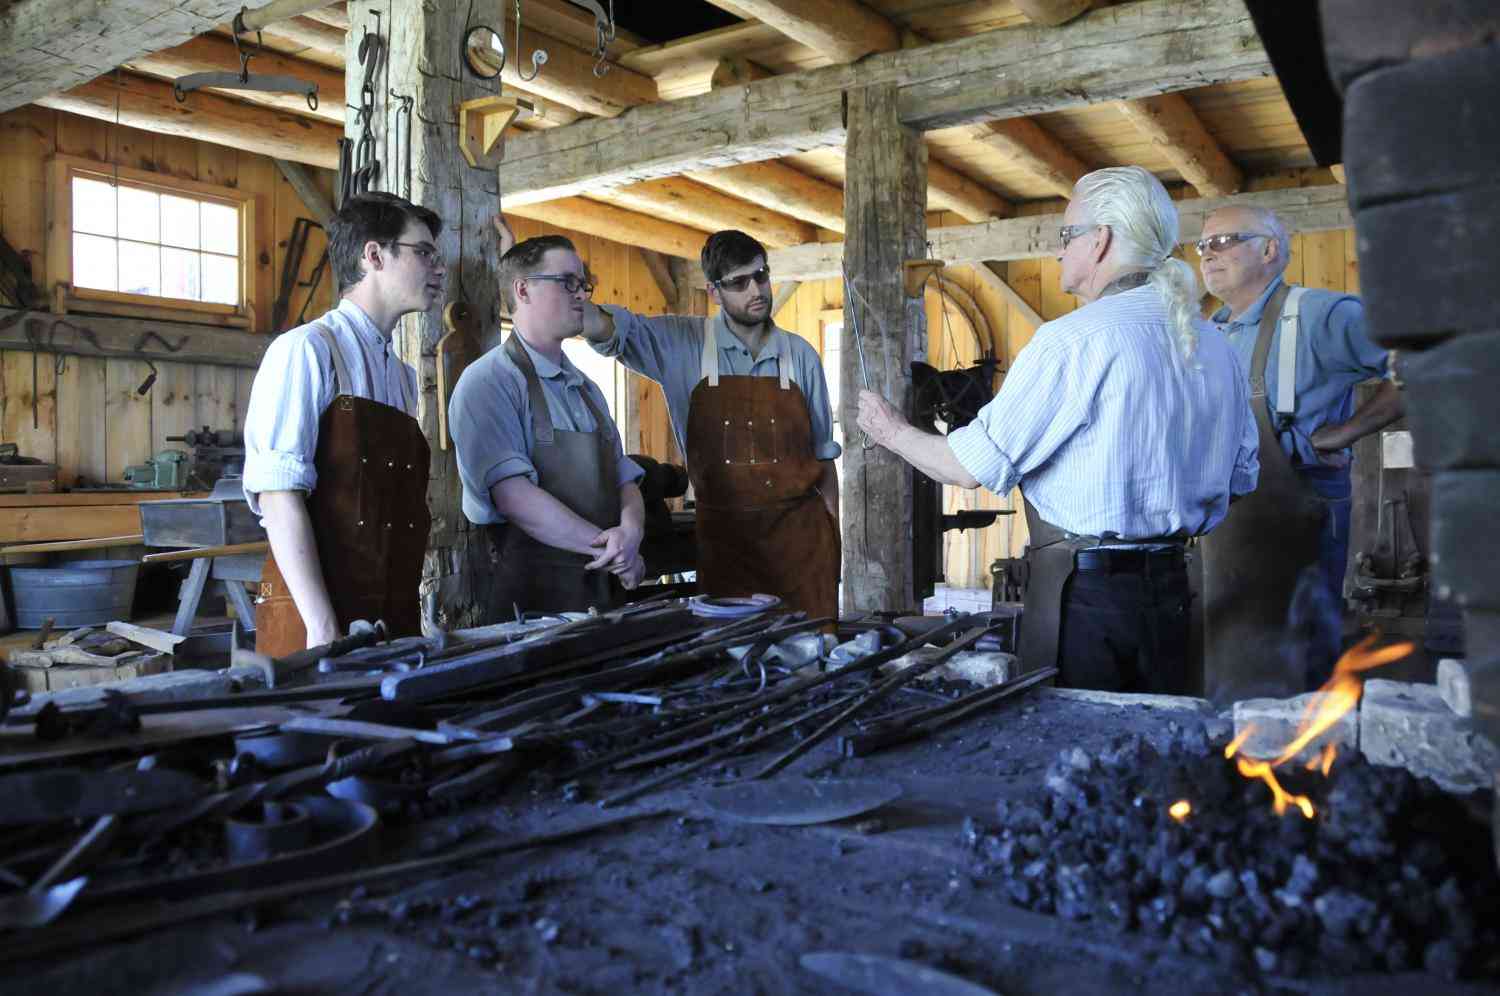 Students and Volunteers in the George Rice Blacksmith Shop at Moreston Heritage Village